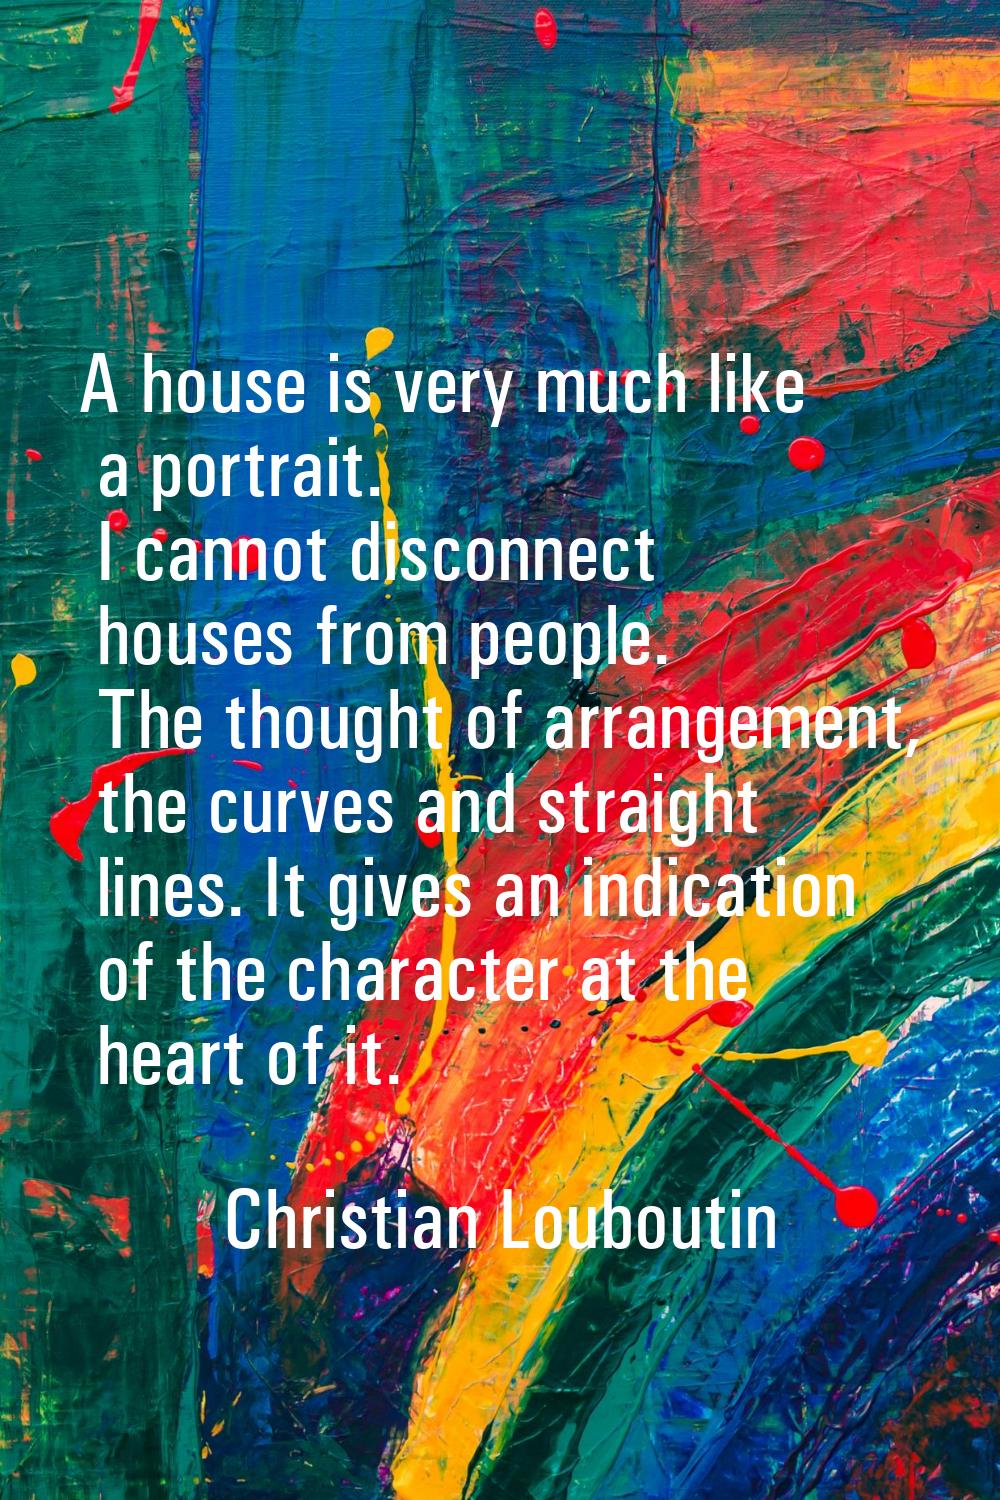 A house is very much like a portrait. I cannot disconnect houses from people. The thought of arrang